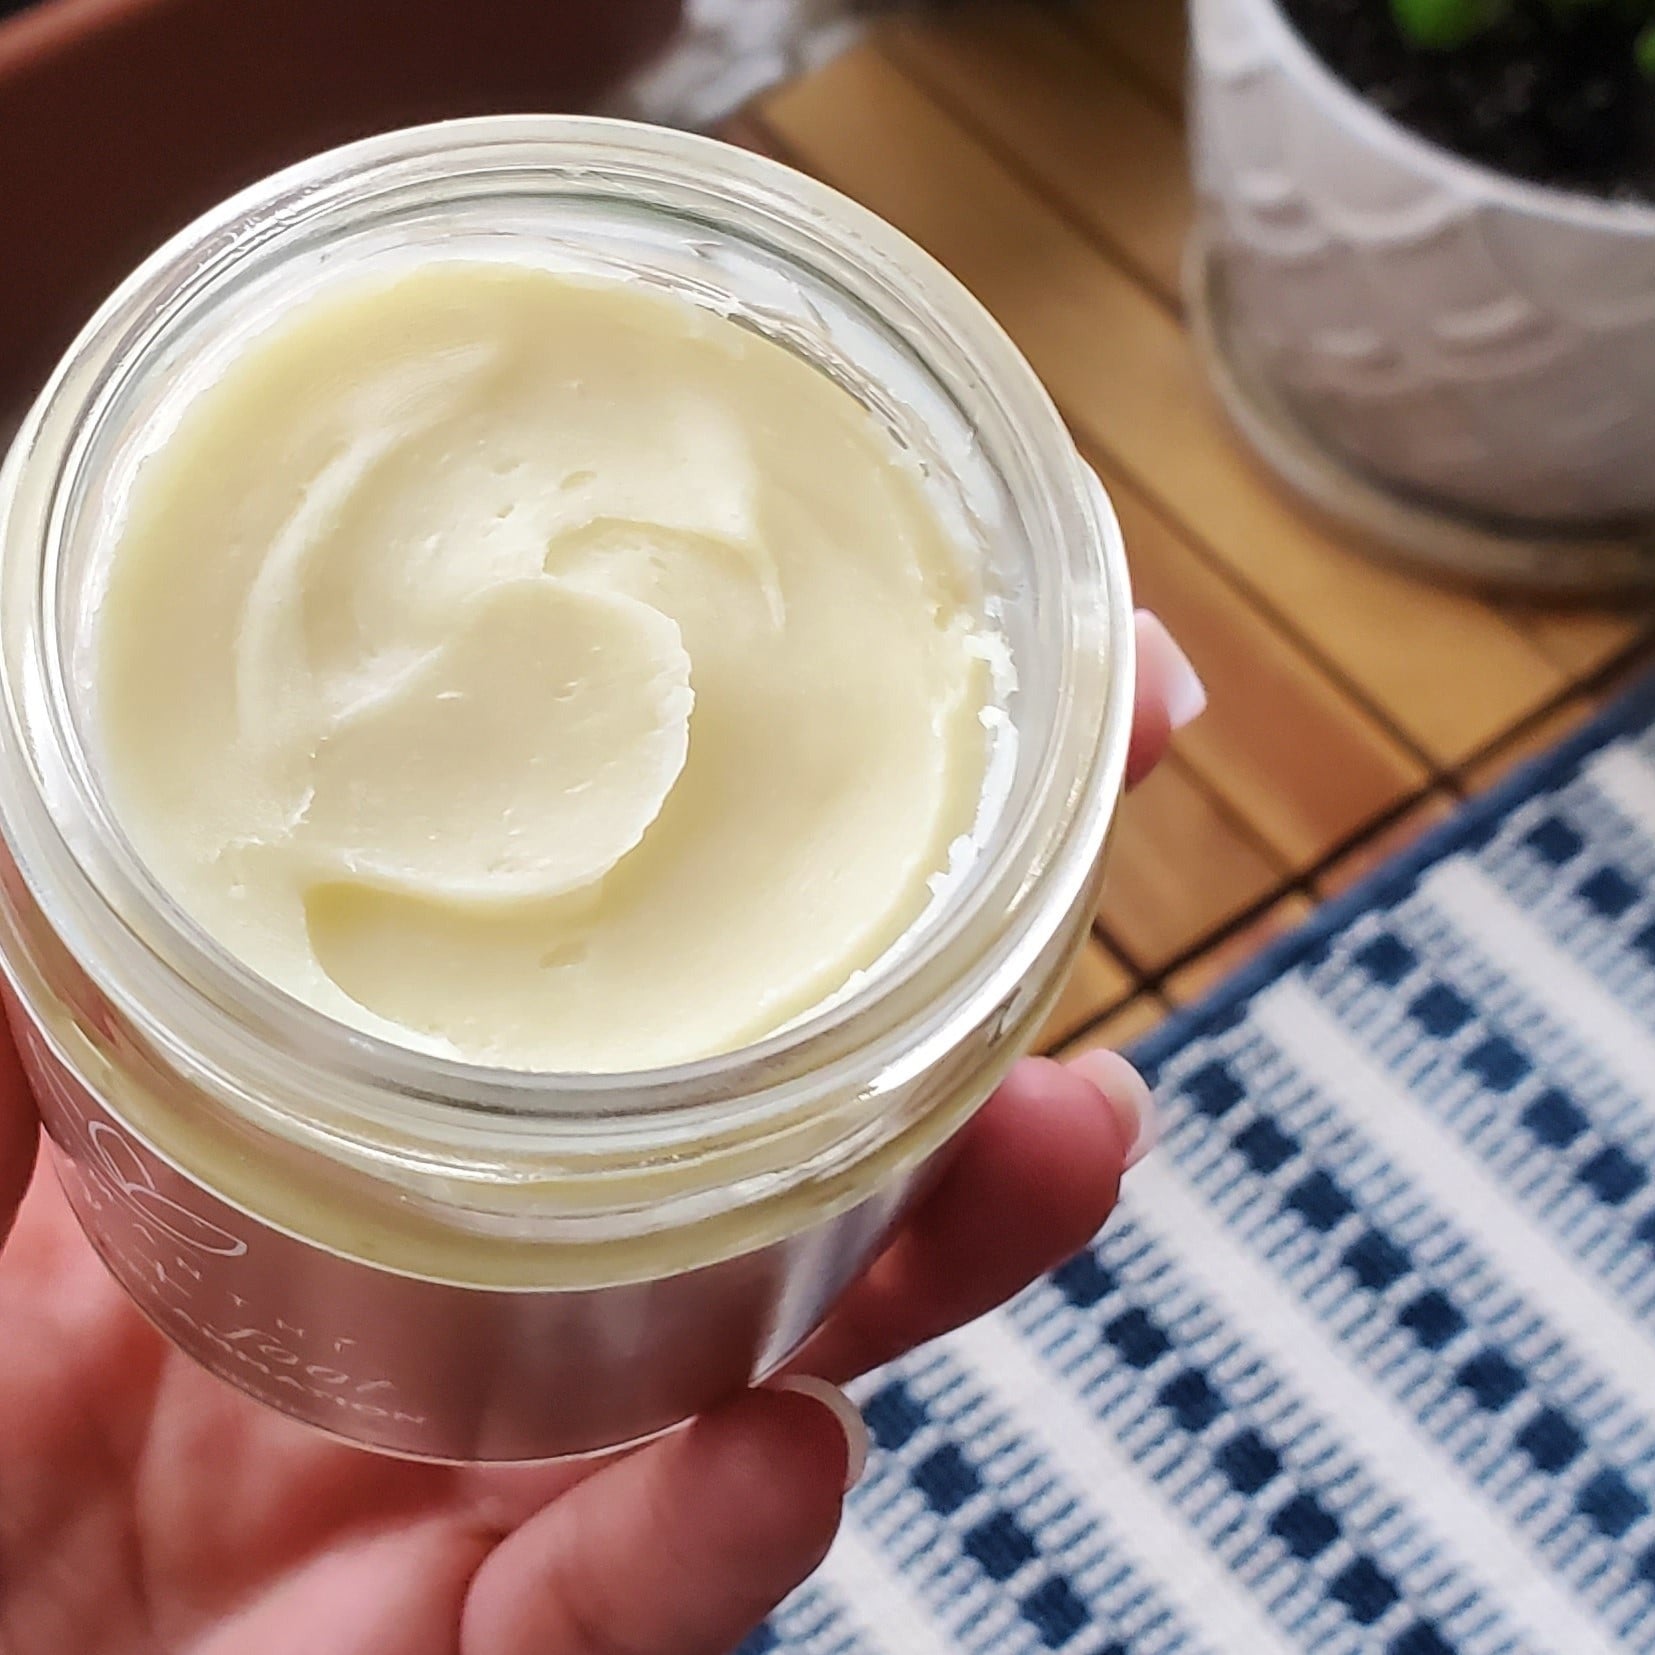 A close up image of the texture of whipped body butter